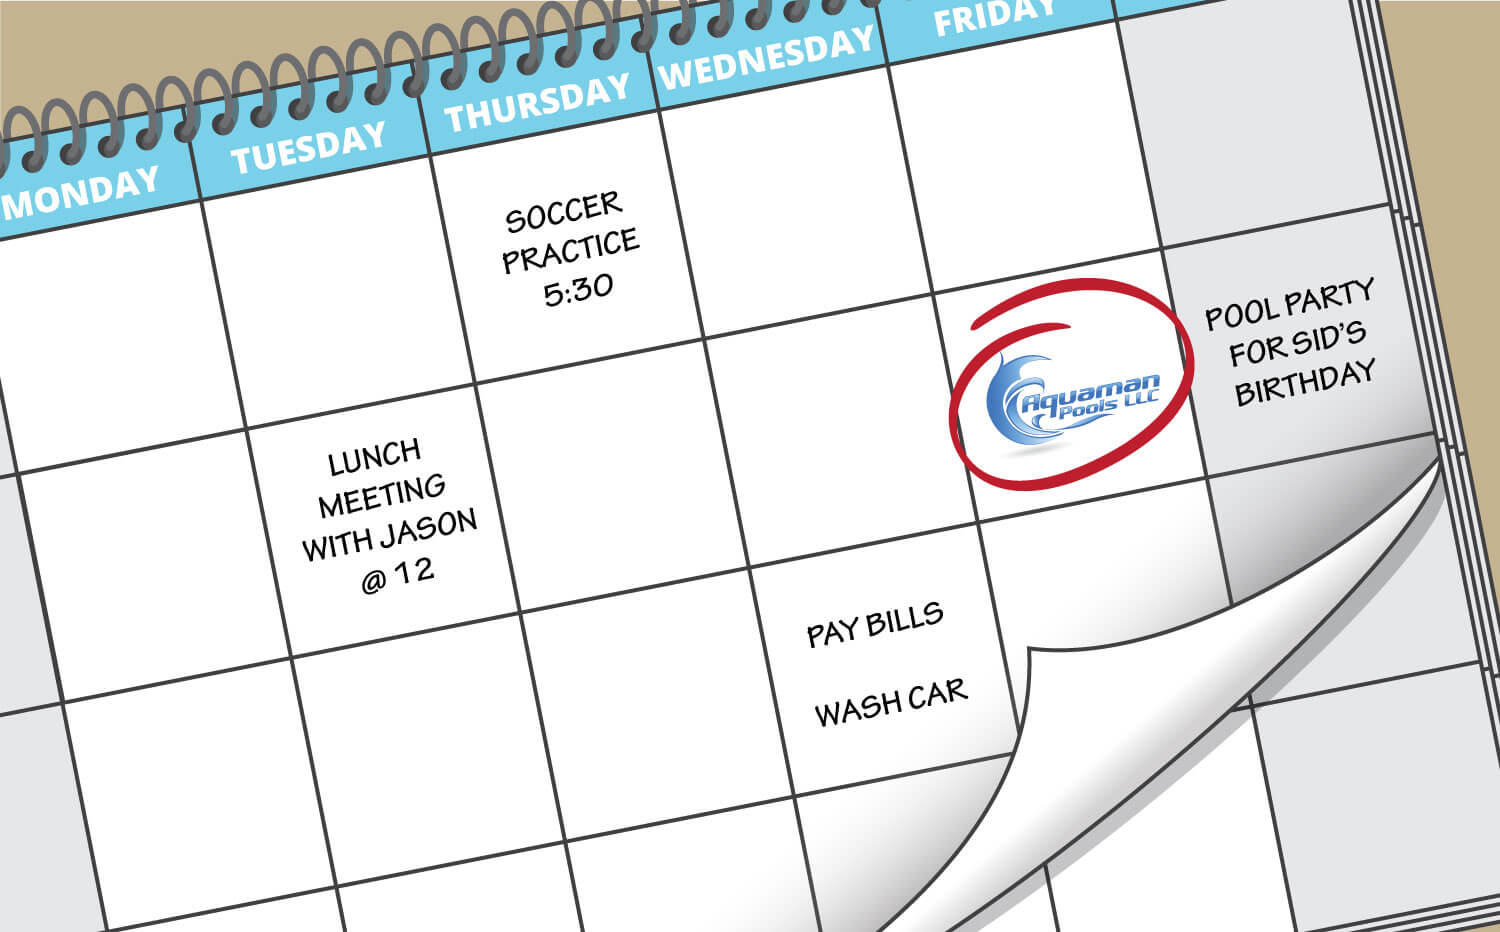 Calendar with scheduled Aquaman appointment